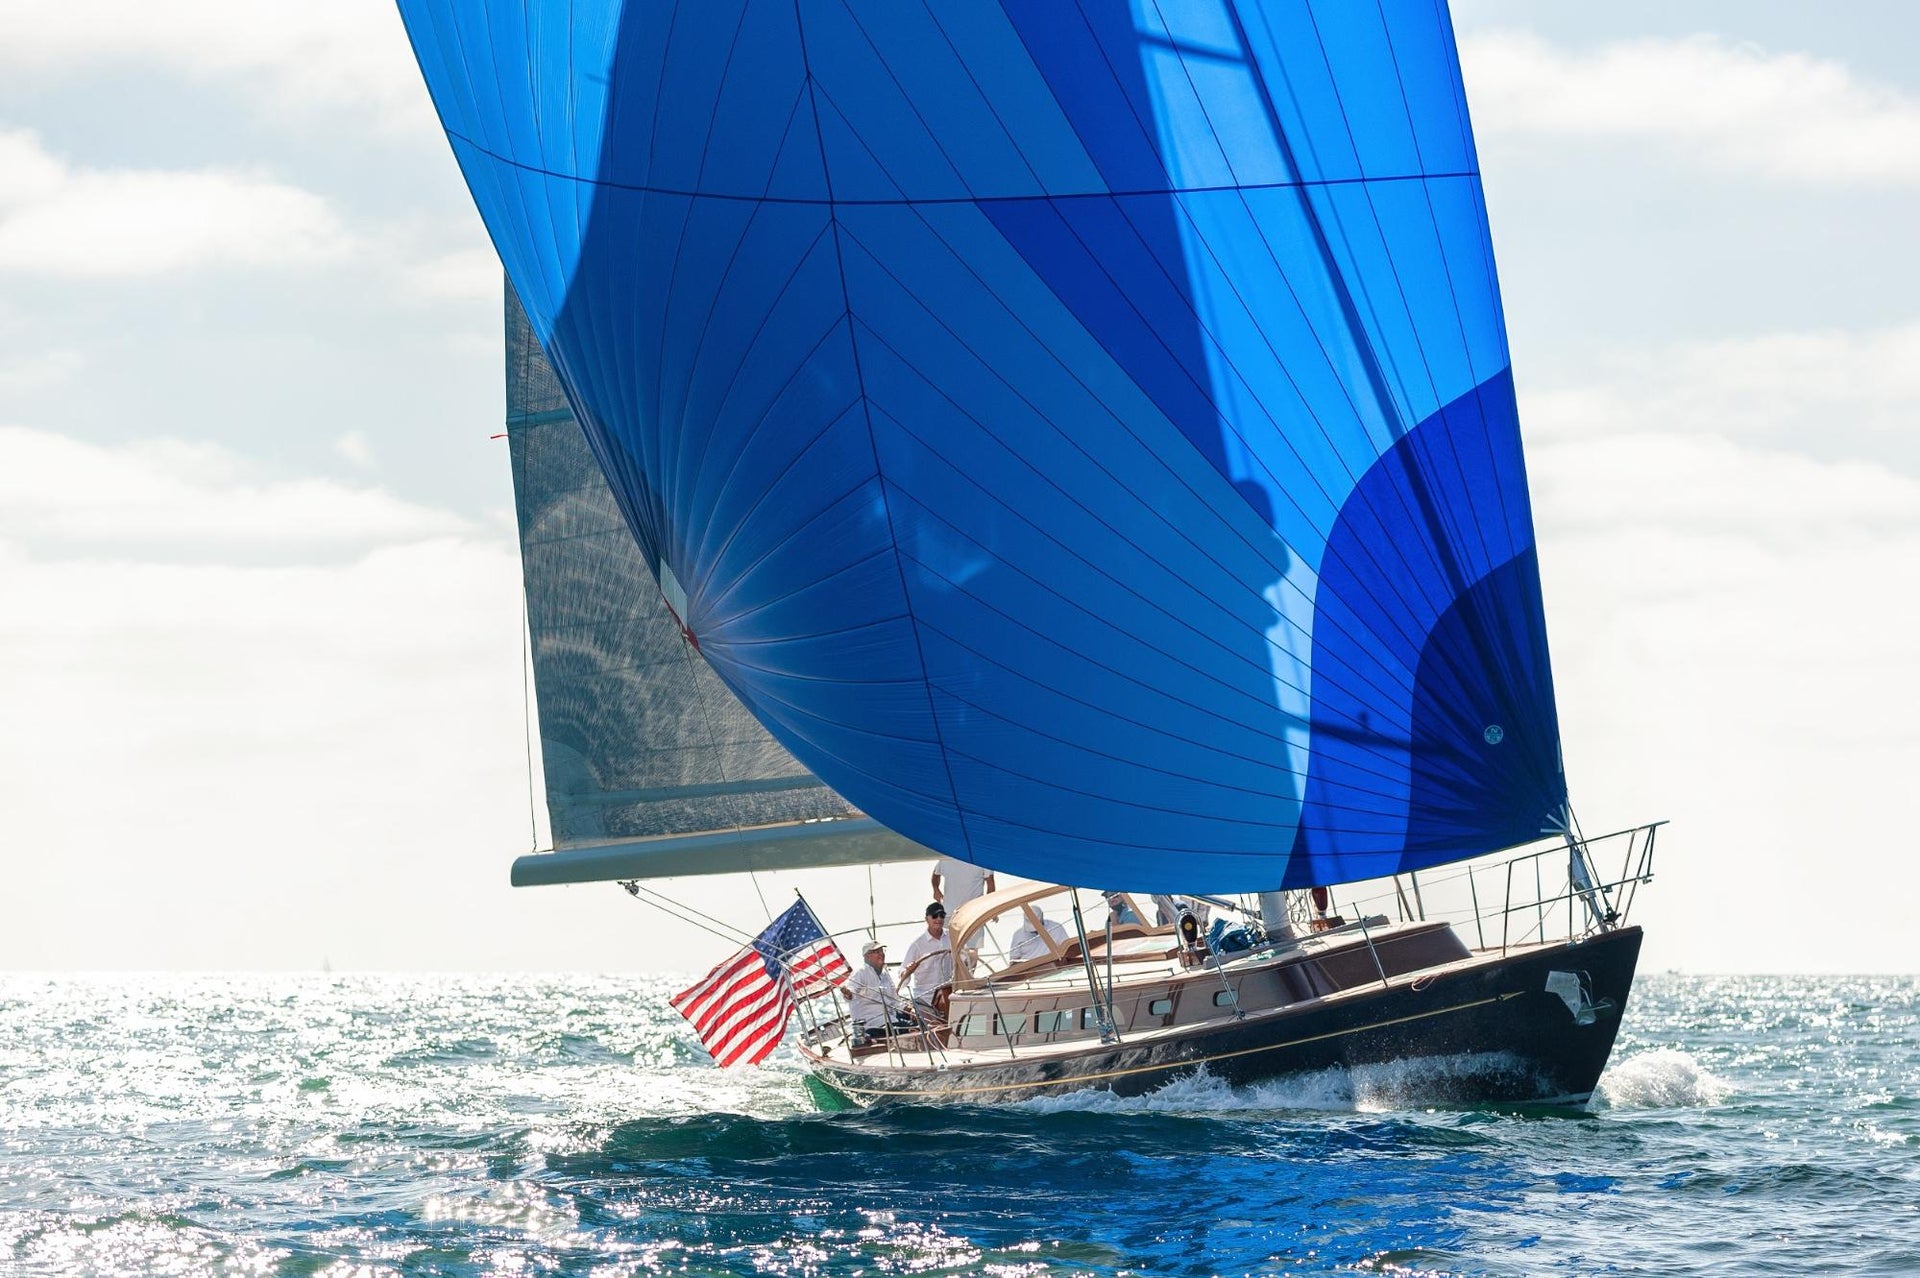 SAILS, SUPPORT, AND SERVICE GO THE DISTANCE